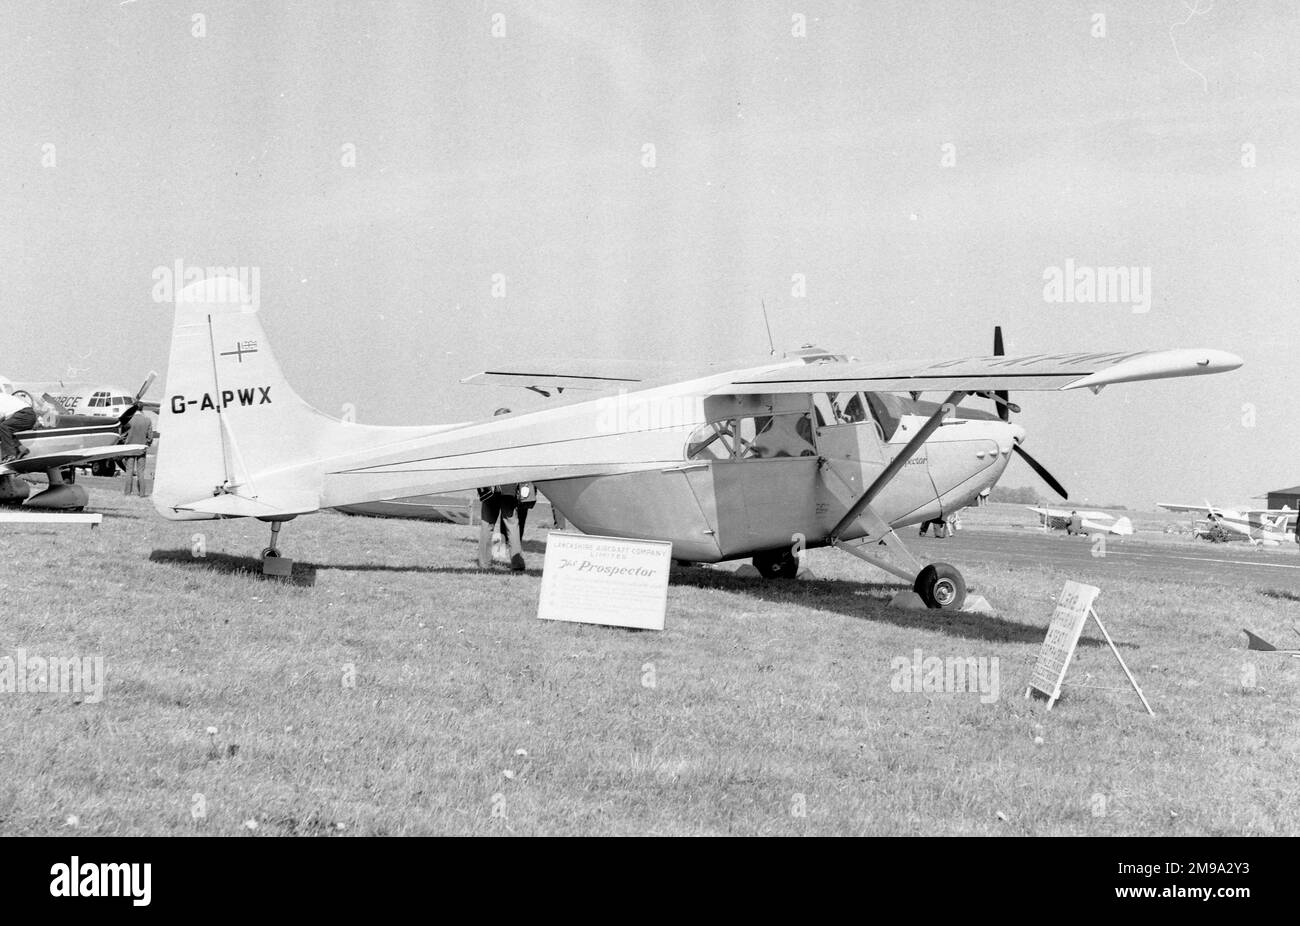 Lancashire Prospector E.P.9 G-APWX - the Prospector was a utility aircraft design by Edgar Percival. the majority of the 47 aircraft completed were produced by Edgar Percival Ltd.. Later production was carried out by the Lancashire Aircraft Company at Squires Gate and Salmesbury, before the last one left Salmesbury ca 1961. Stock Photo